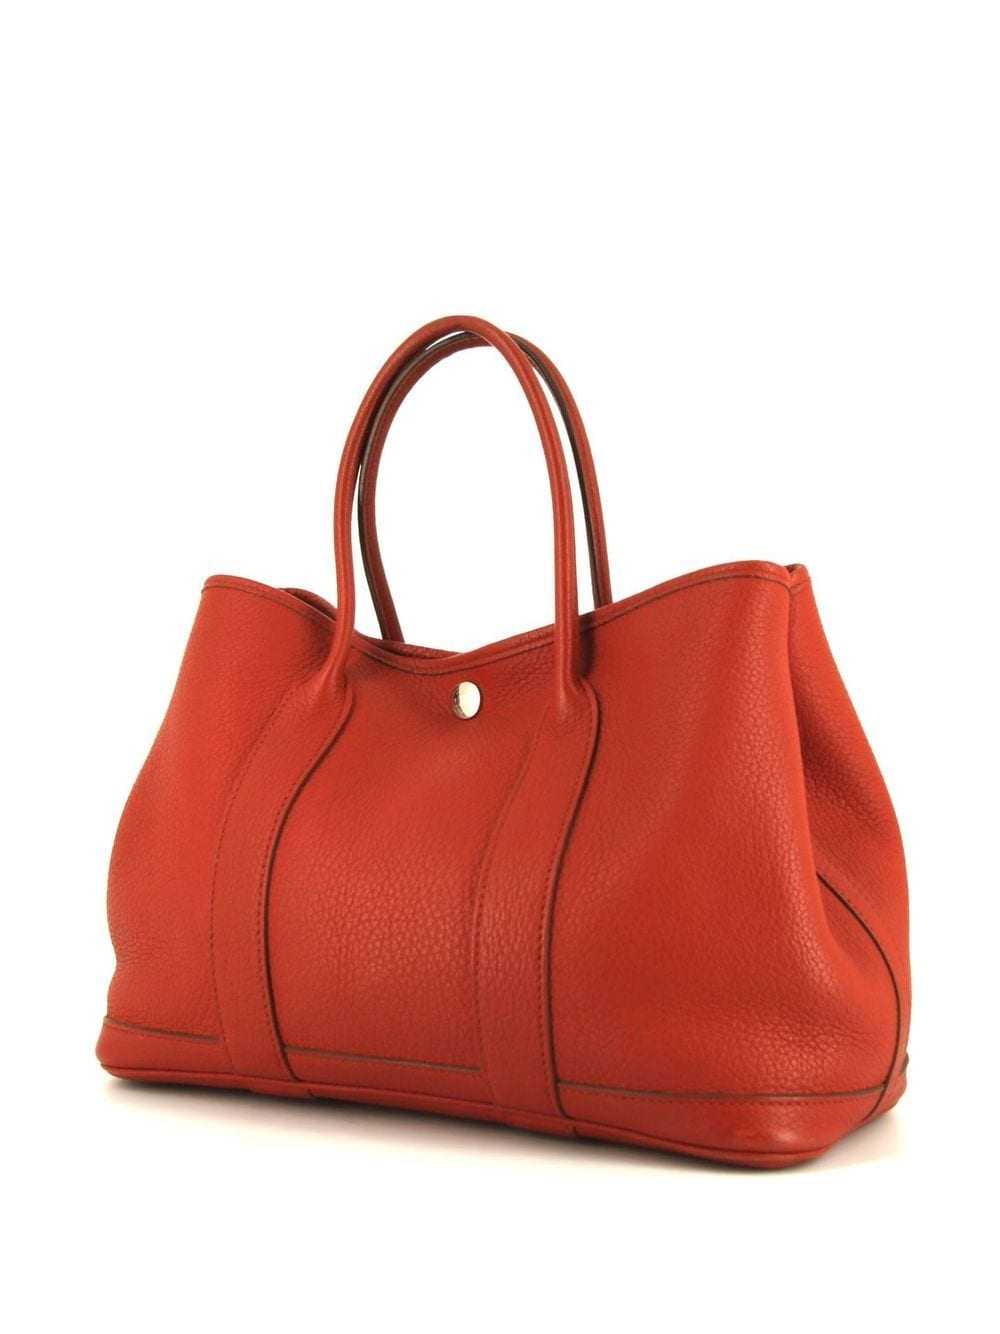 Hermès Pre-Owned 2013 Garden Party tote bag - Red - image 3